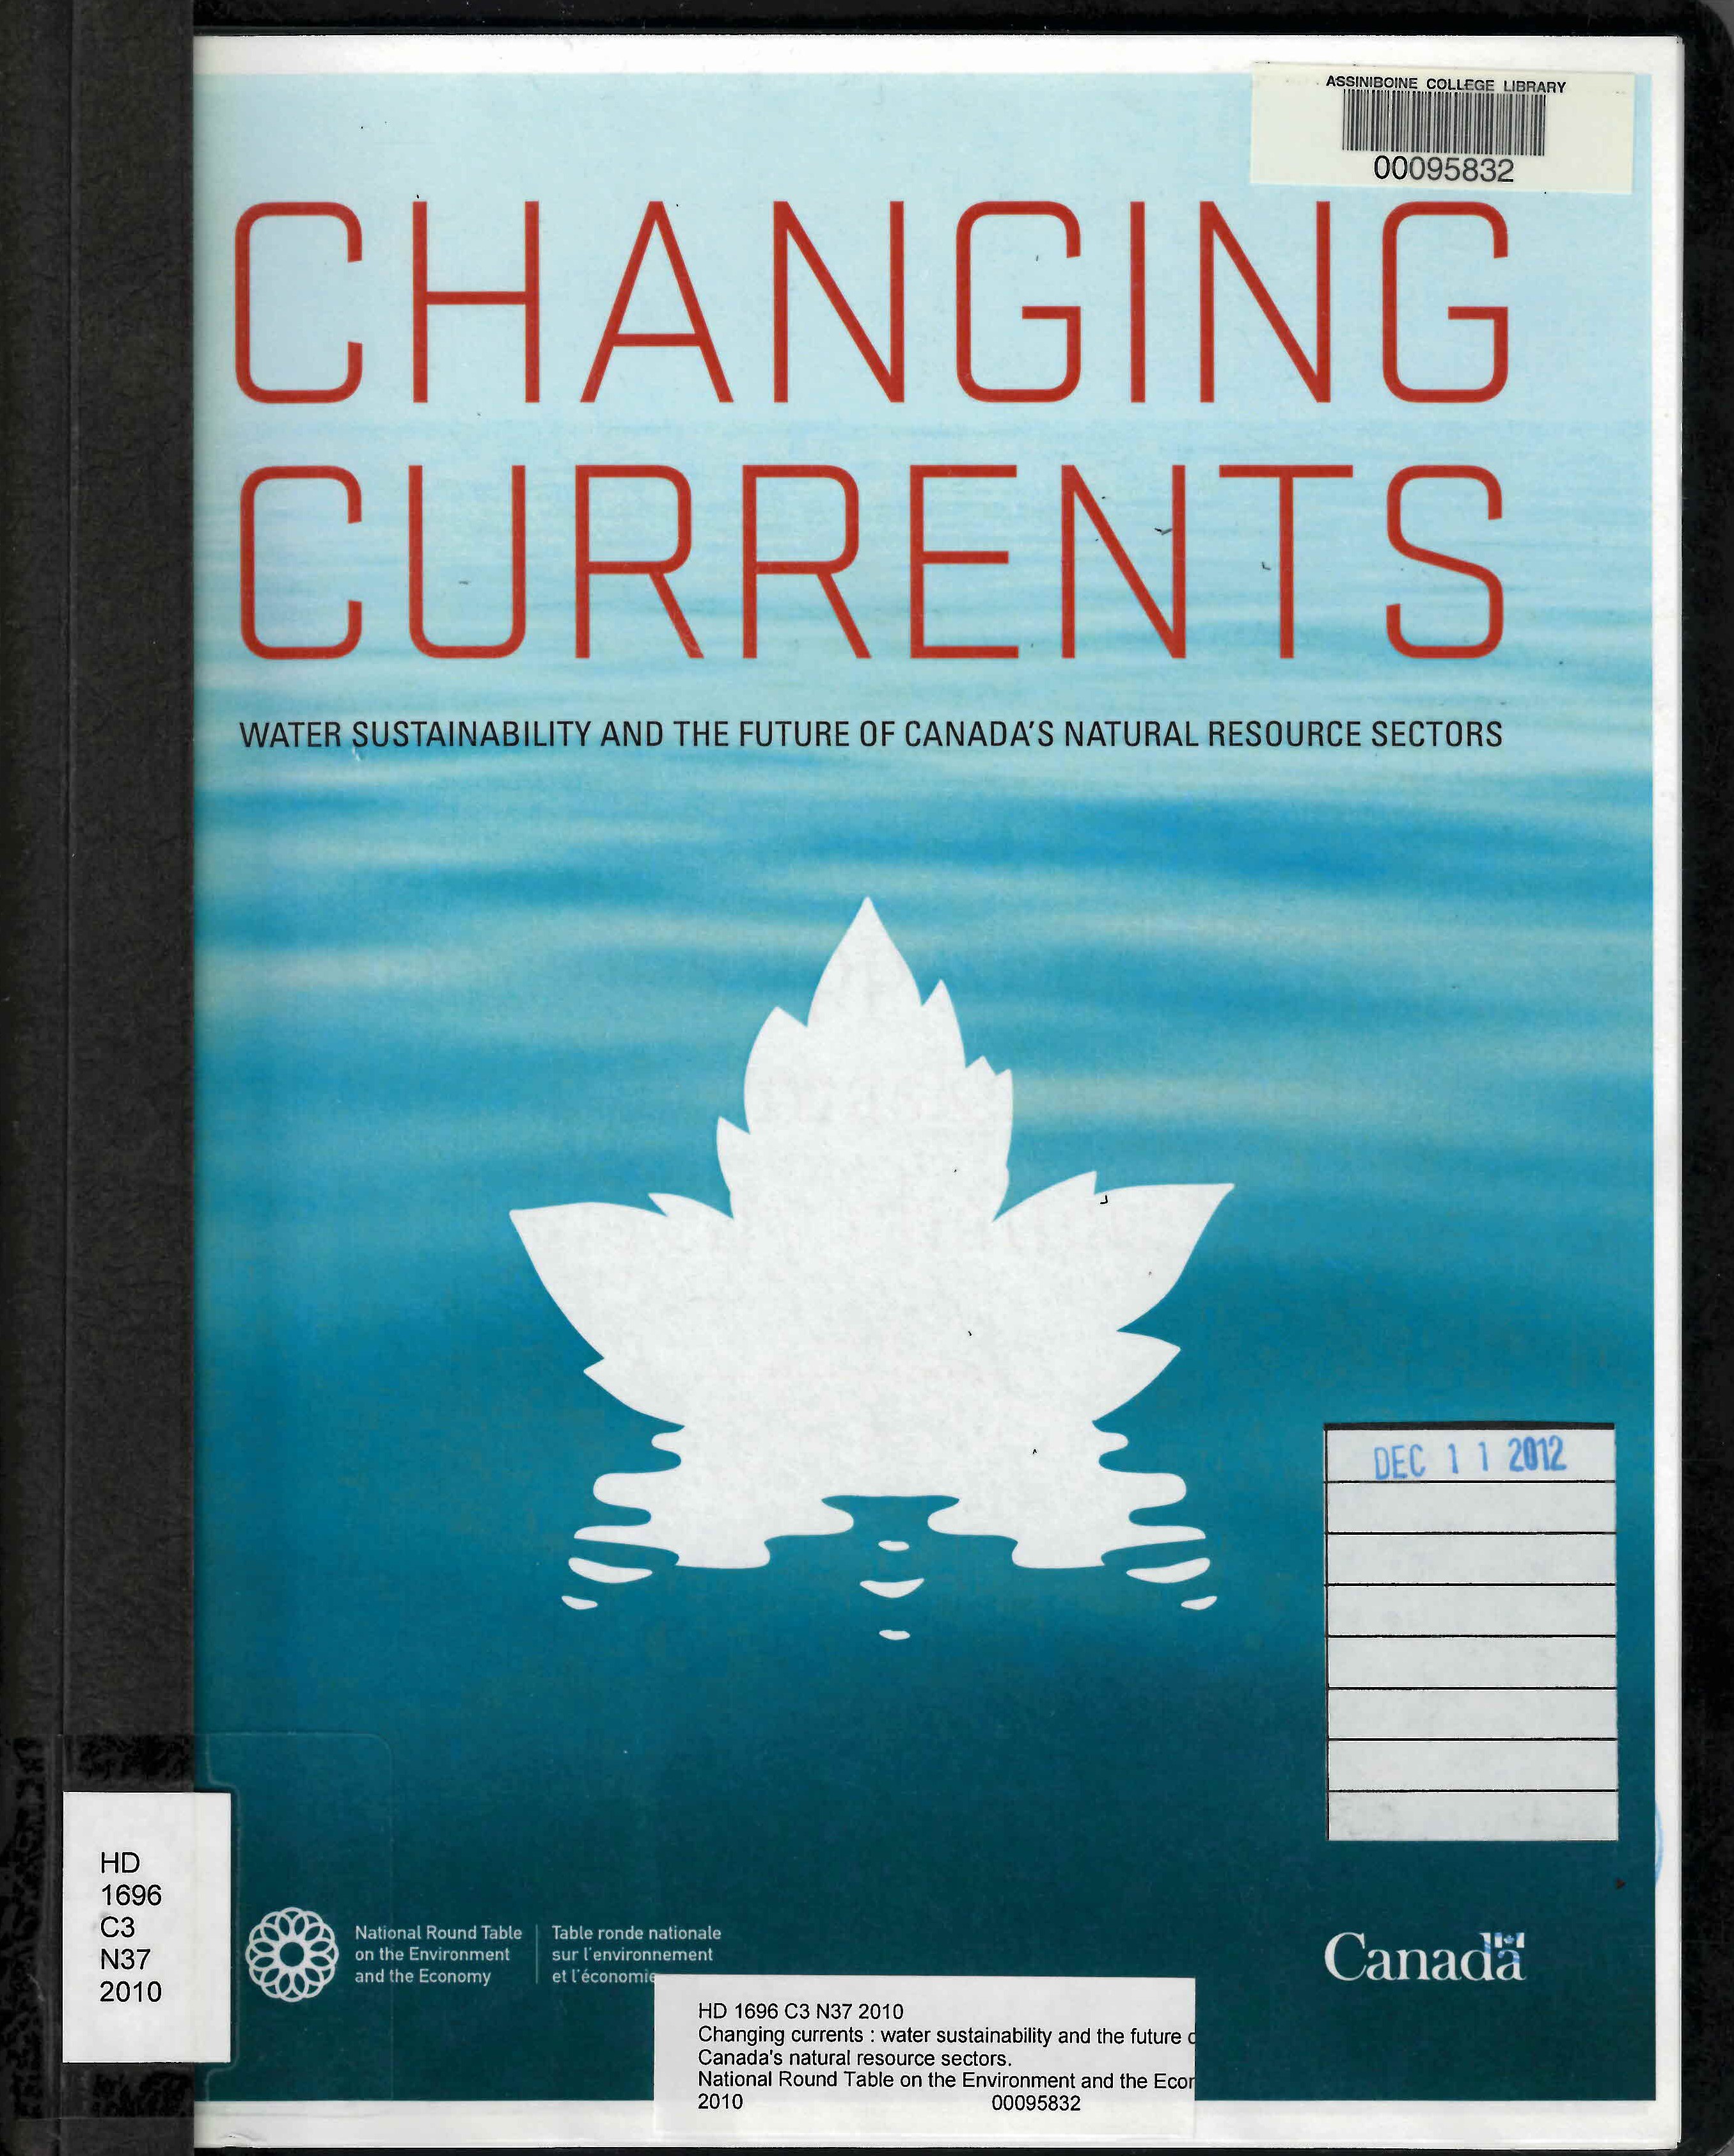 Changing currents : water sustainability and the future of Canada's natural resource sectors